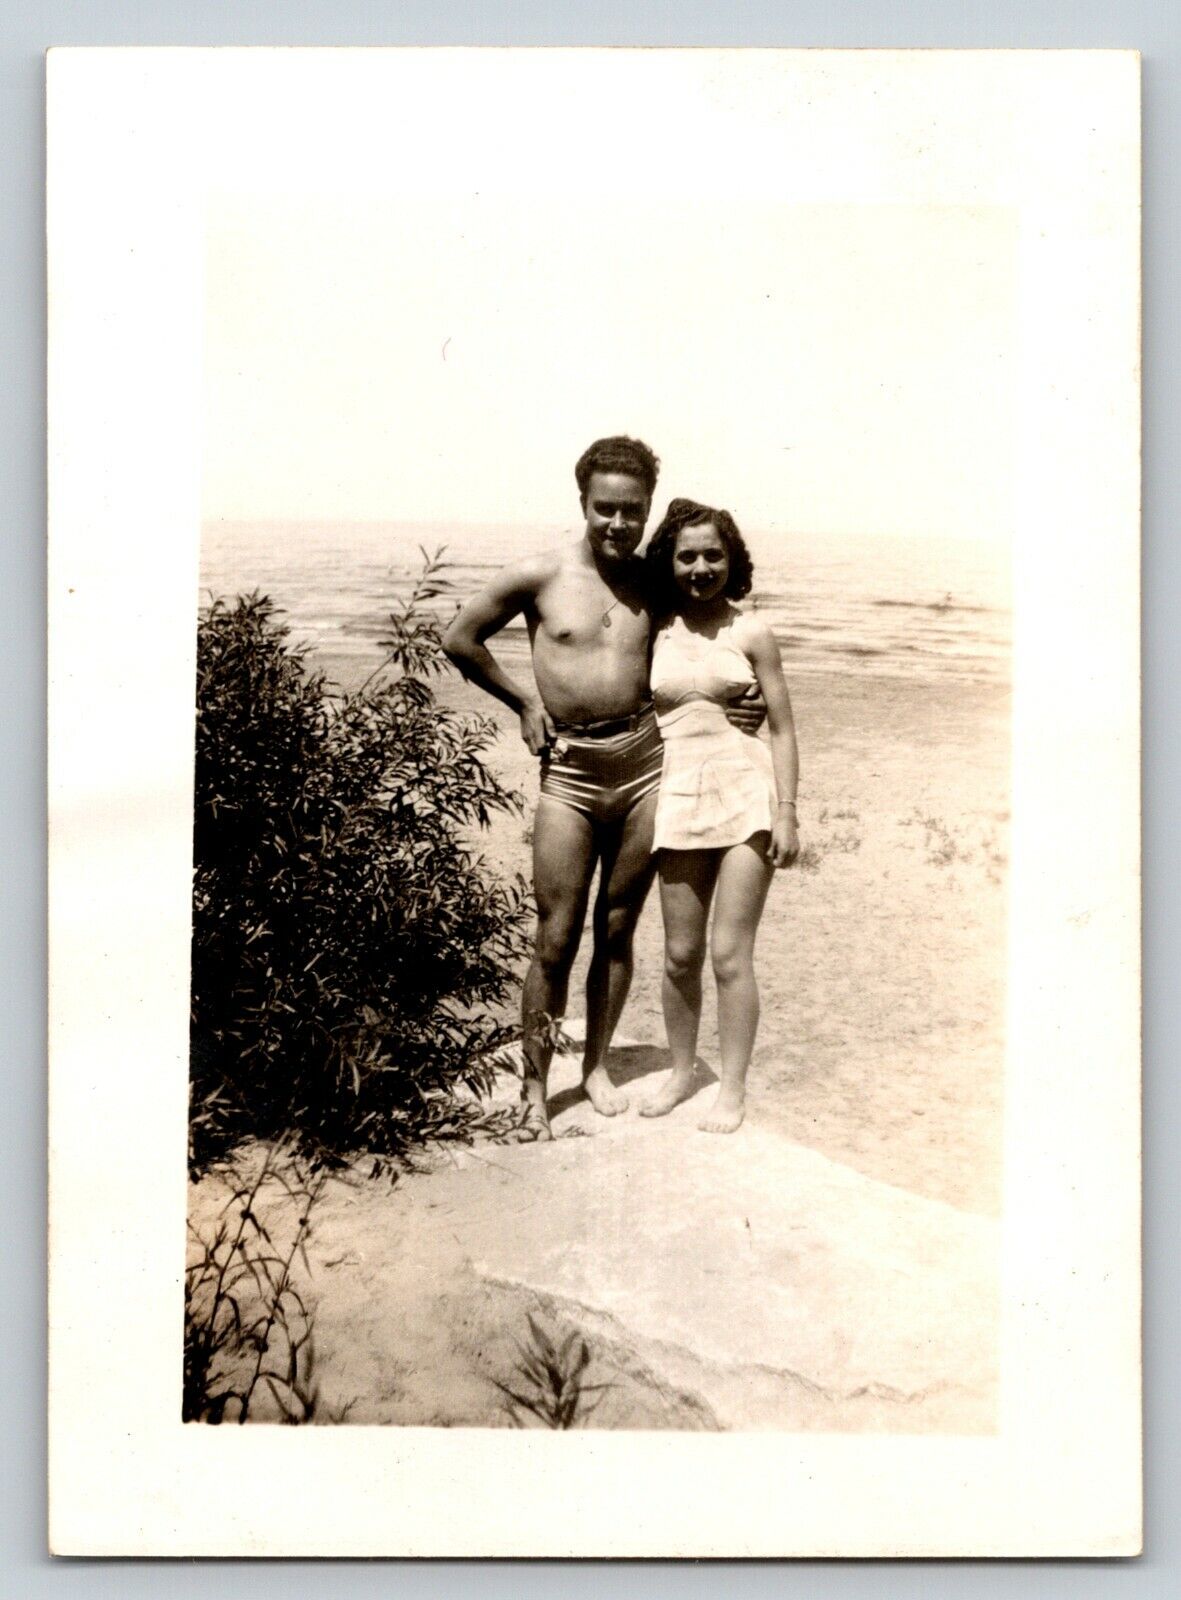 YOUNG COUPLE POSING AT THE BEACH Vintage B&W Photograph - APPROX - 2.75\